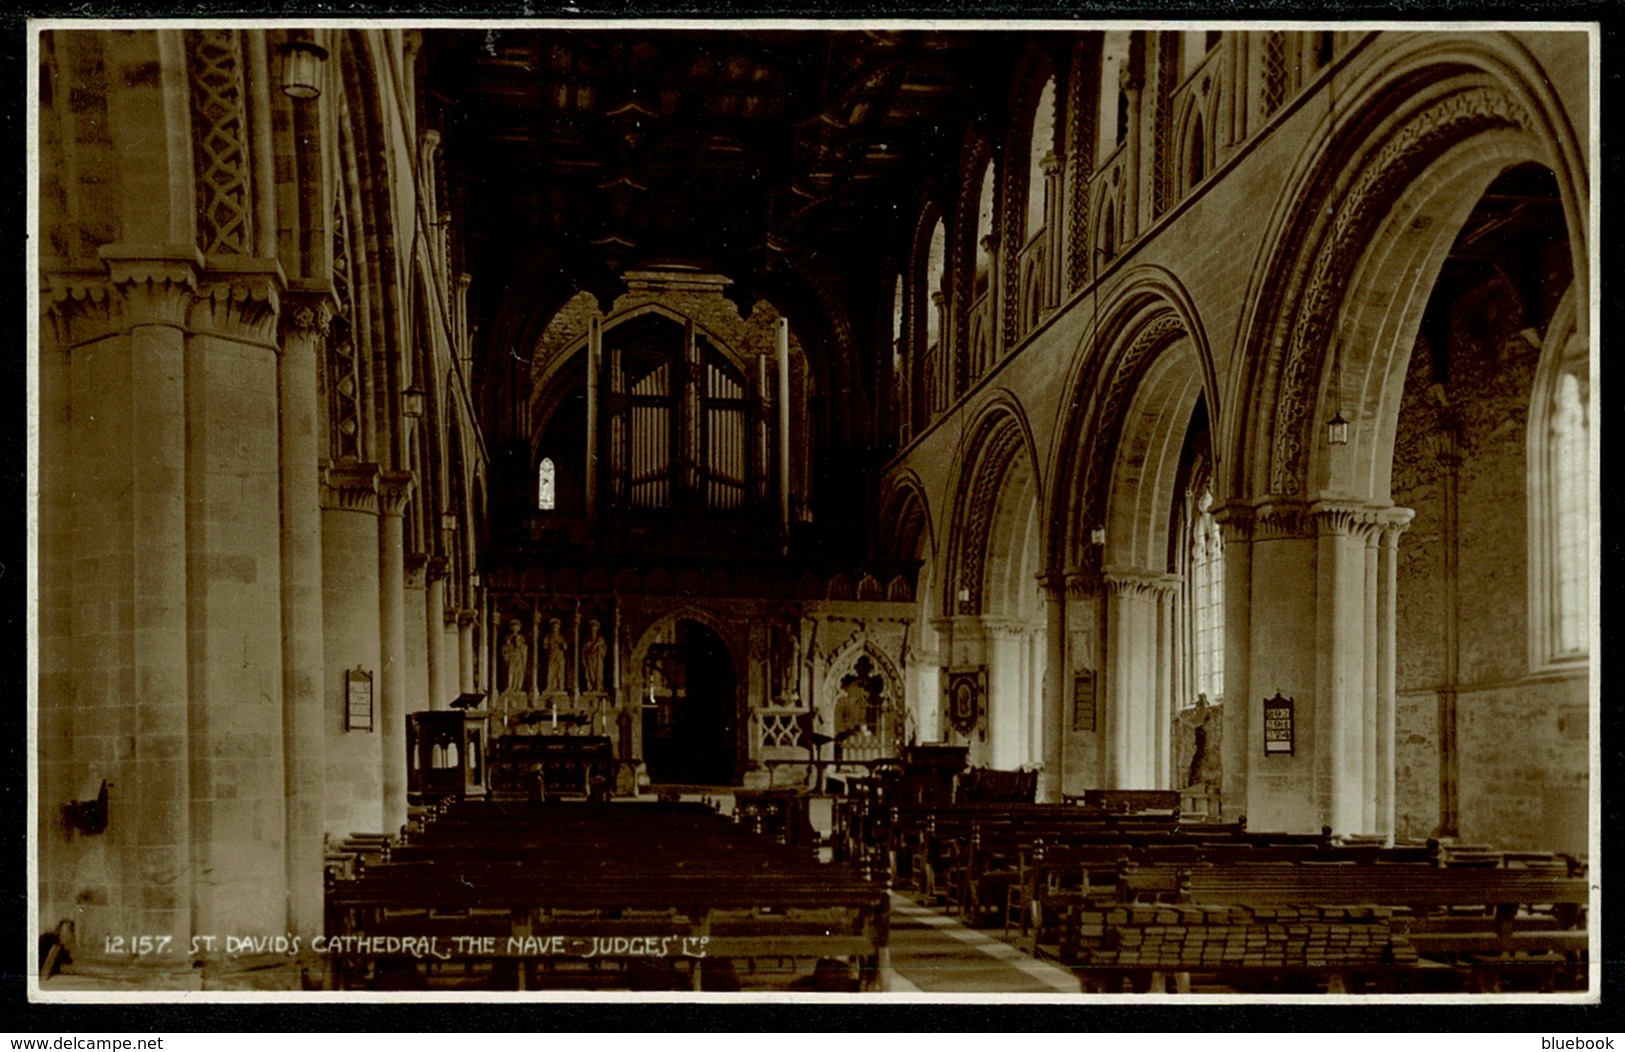 Ref 1272 - Judges Real Photo Postcard - St David's Cathedral - The Nave - Pembrokeshire Wales - Pembrokeshire